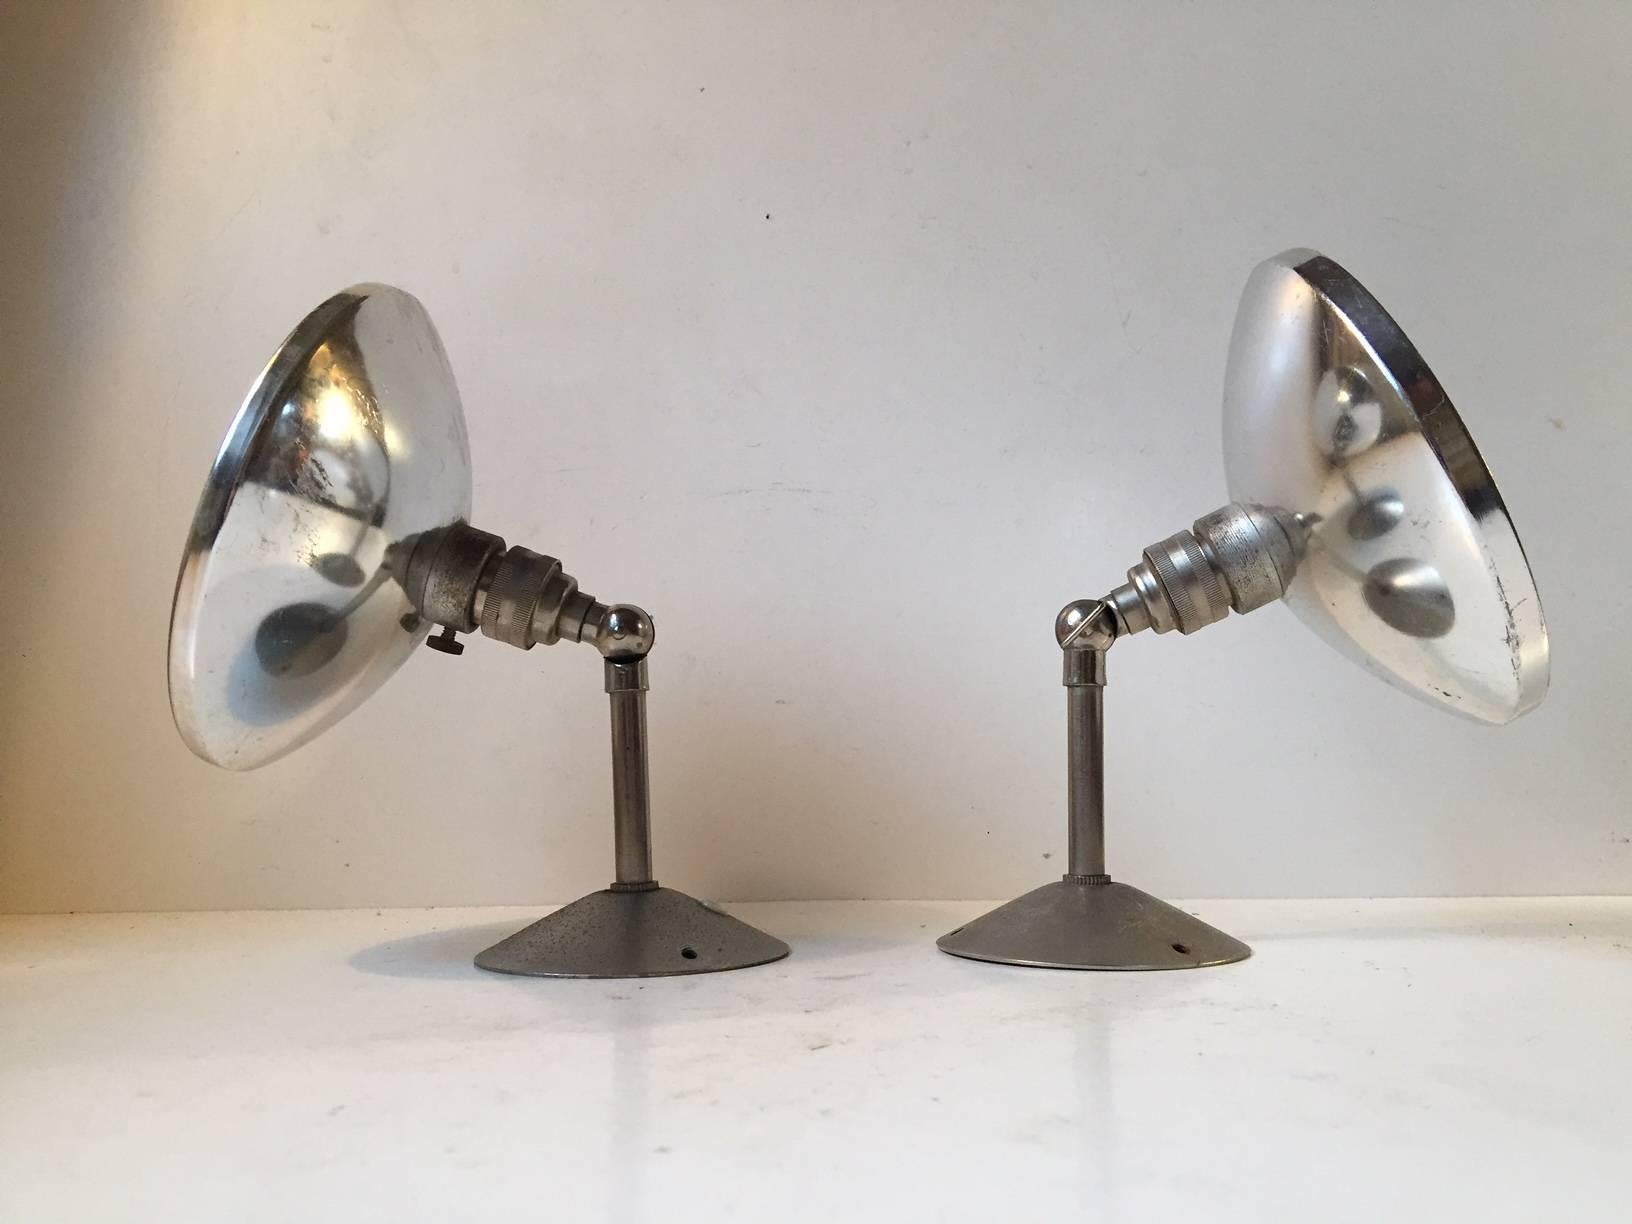 A set of two French wall lights with engine turned stems and aluminium shades. They have come out of an old warehouse. The style is reminiscent of Jielde and Bauhaus fixtures. They are fitted with their original Bajonet socket.